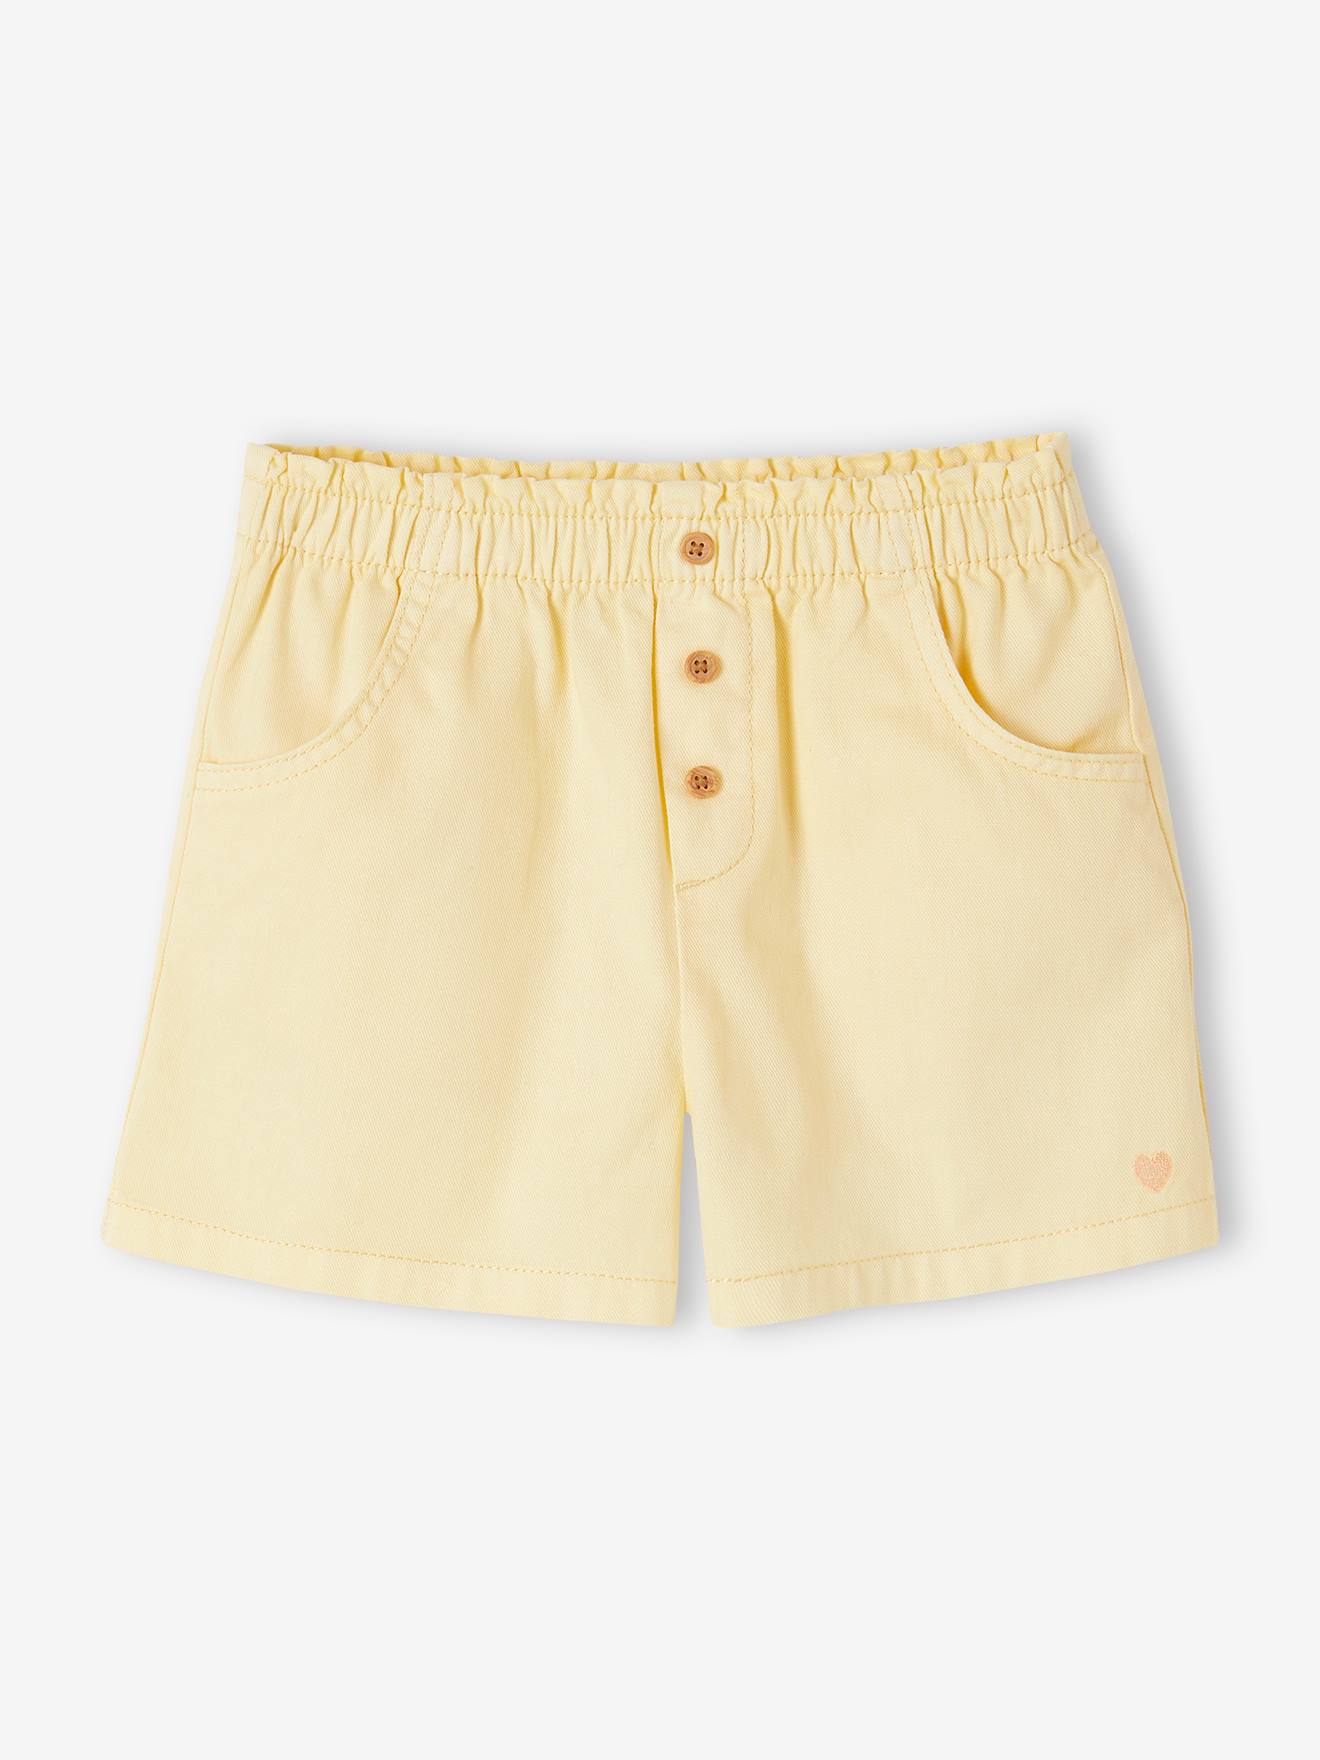 Colourful Shorts, Easy to Put On, for Girls pastel yellow